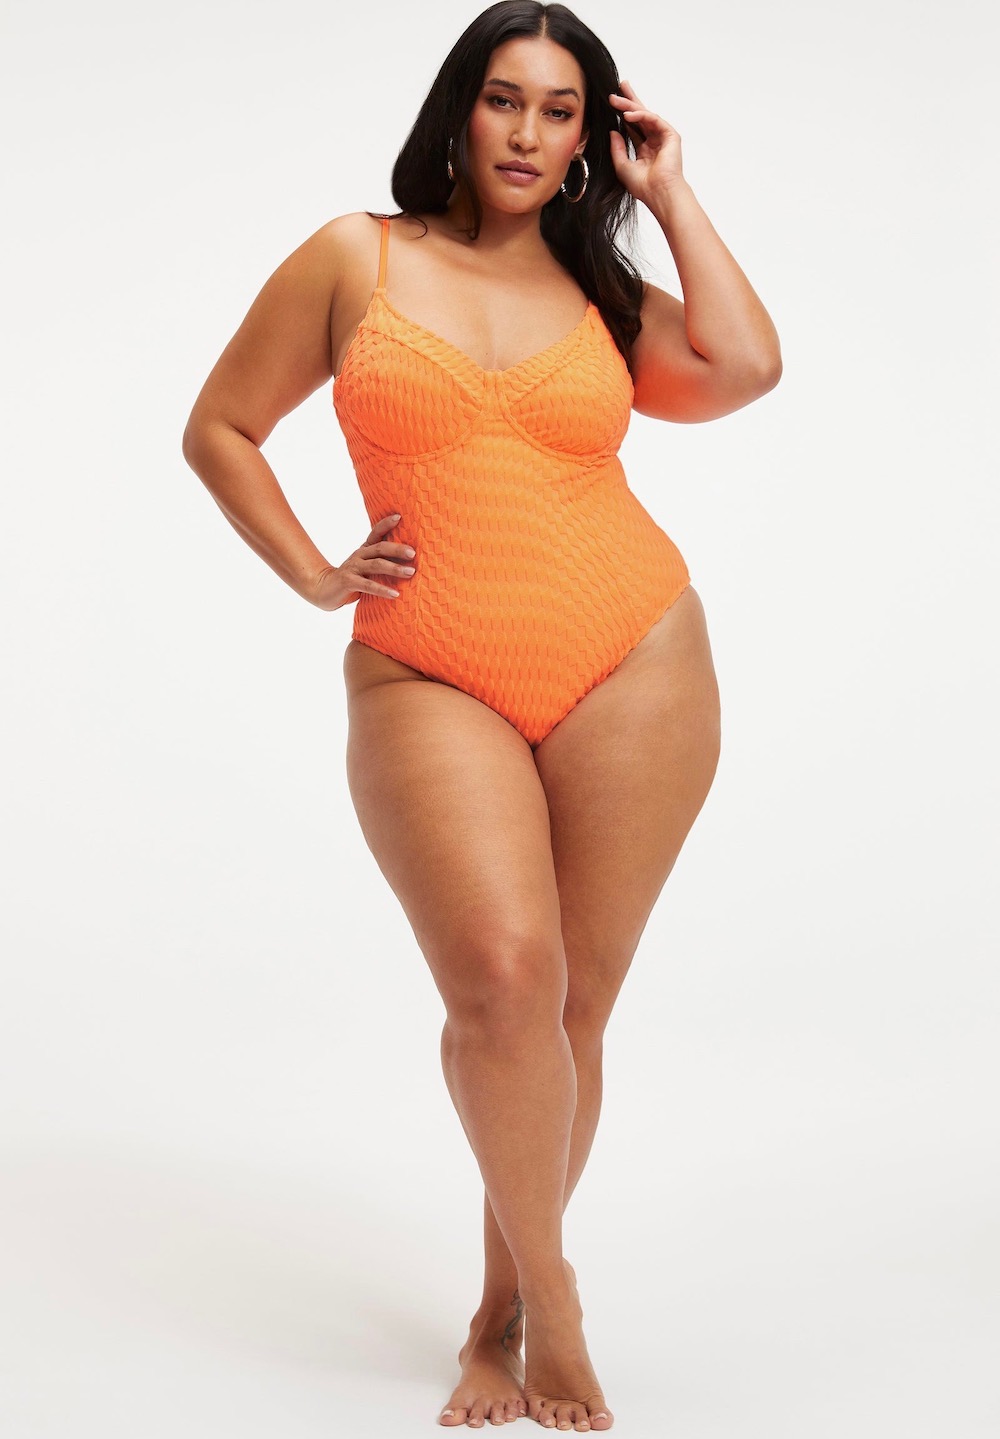 Swimsuits for Big Busts That Are Cute AND Supportive - theFashionSpot